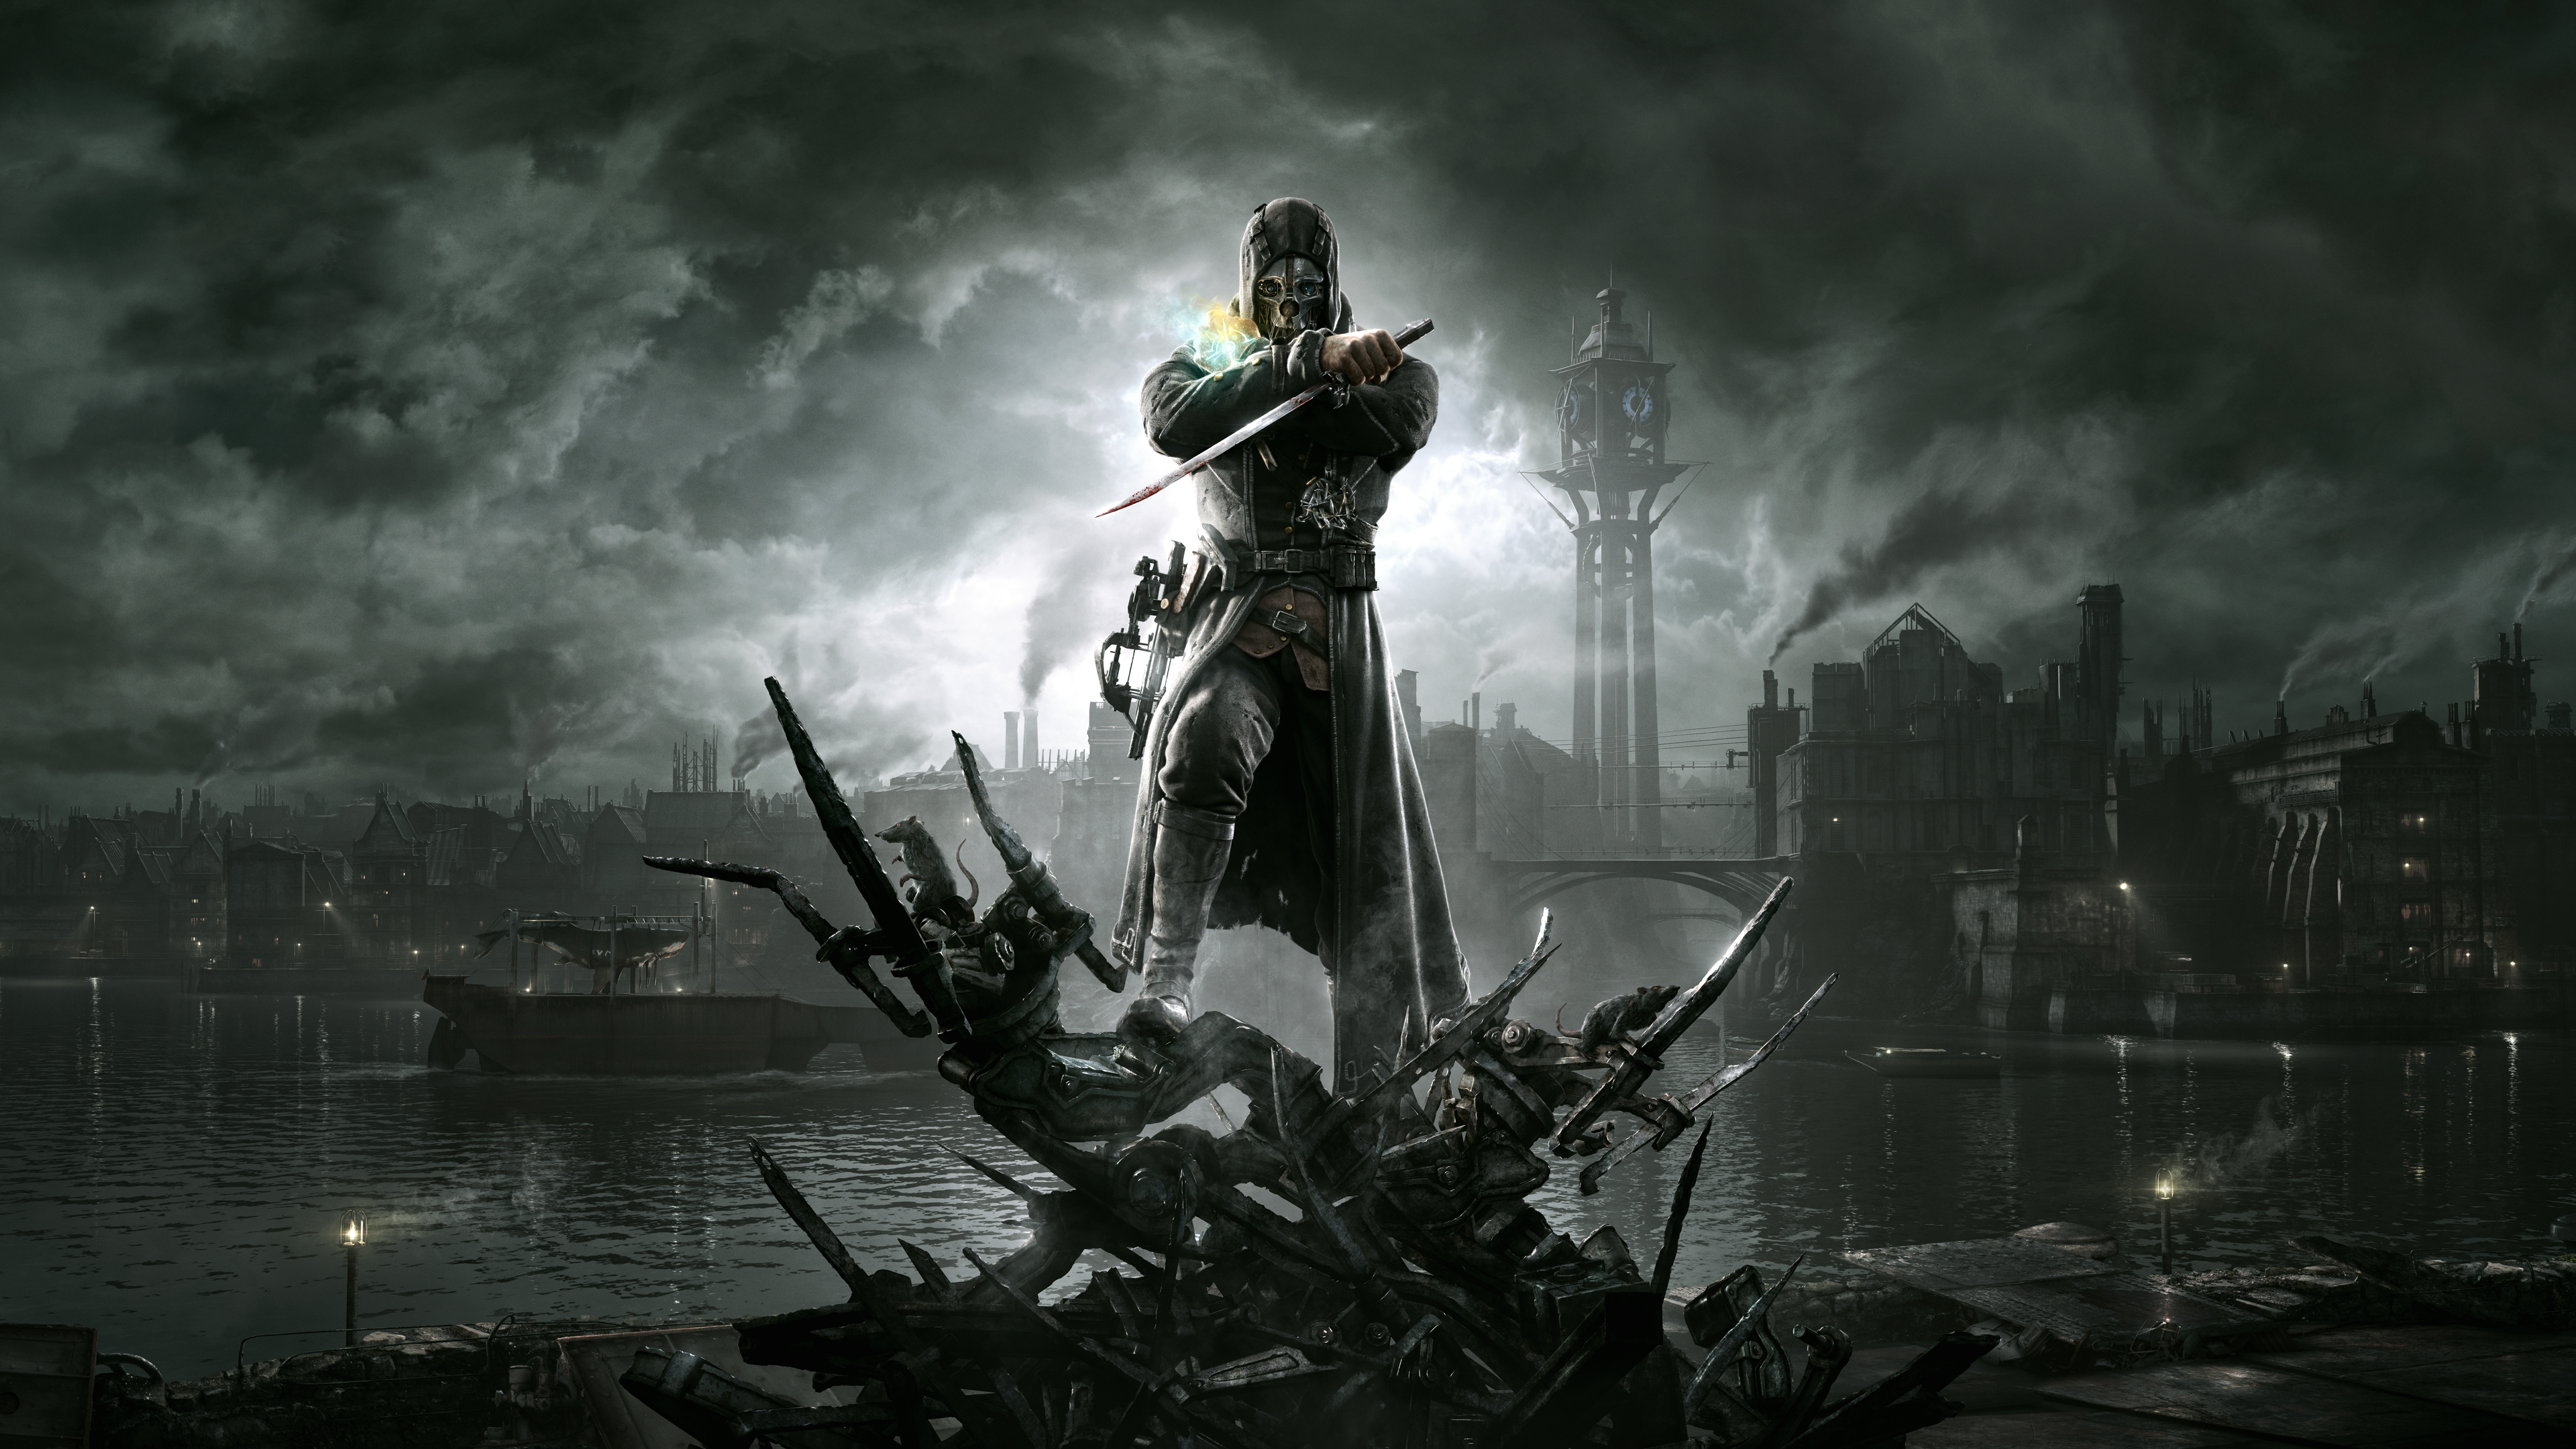 Dishonored , HD Wallpaper & Backgrounds